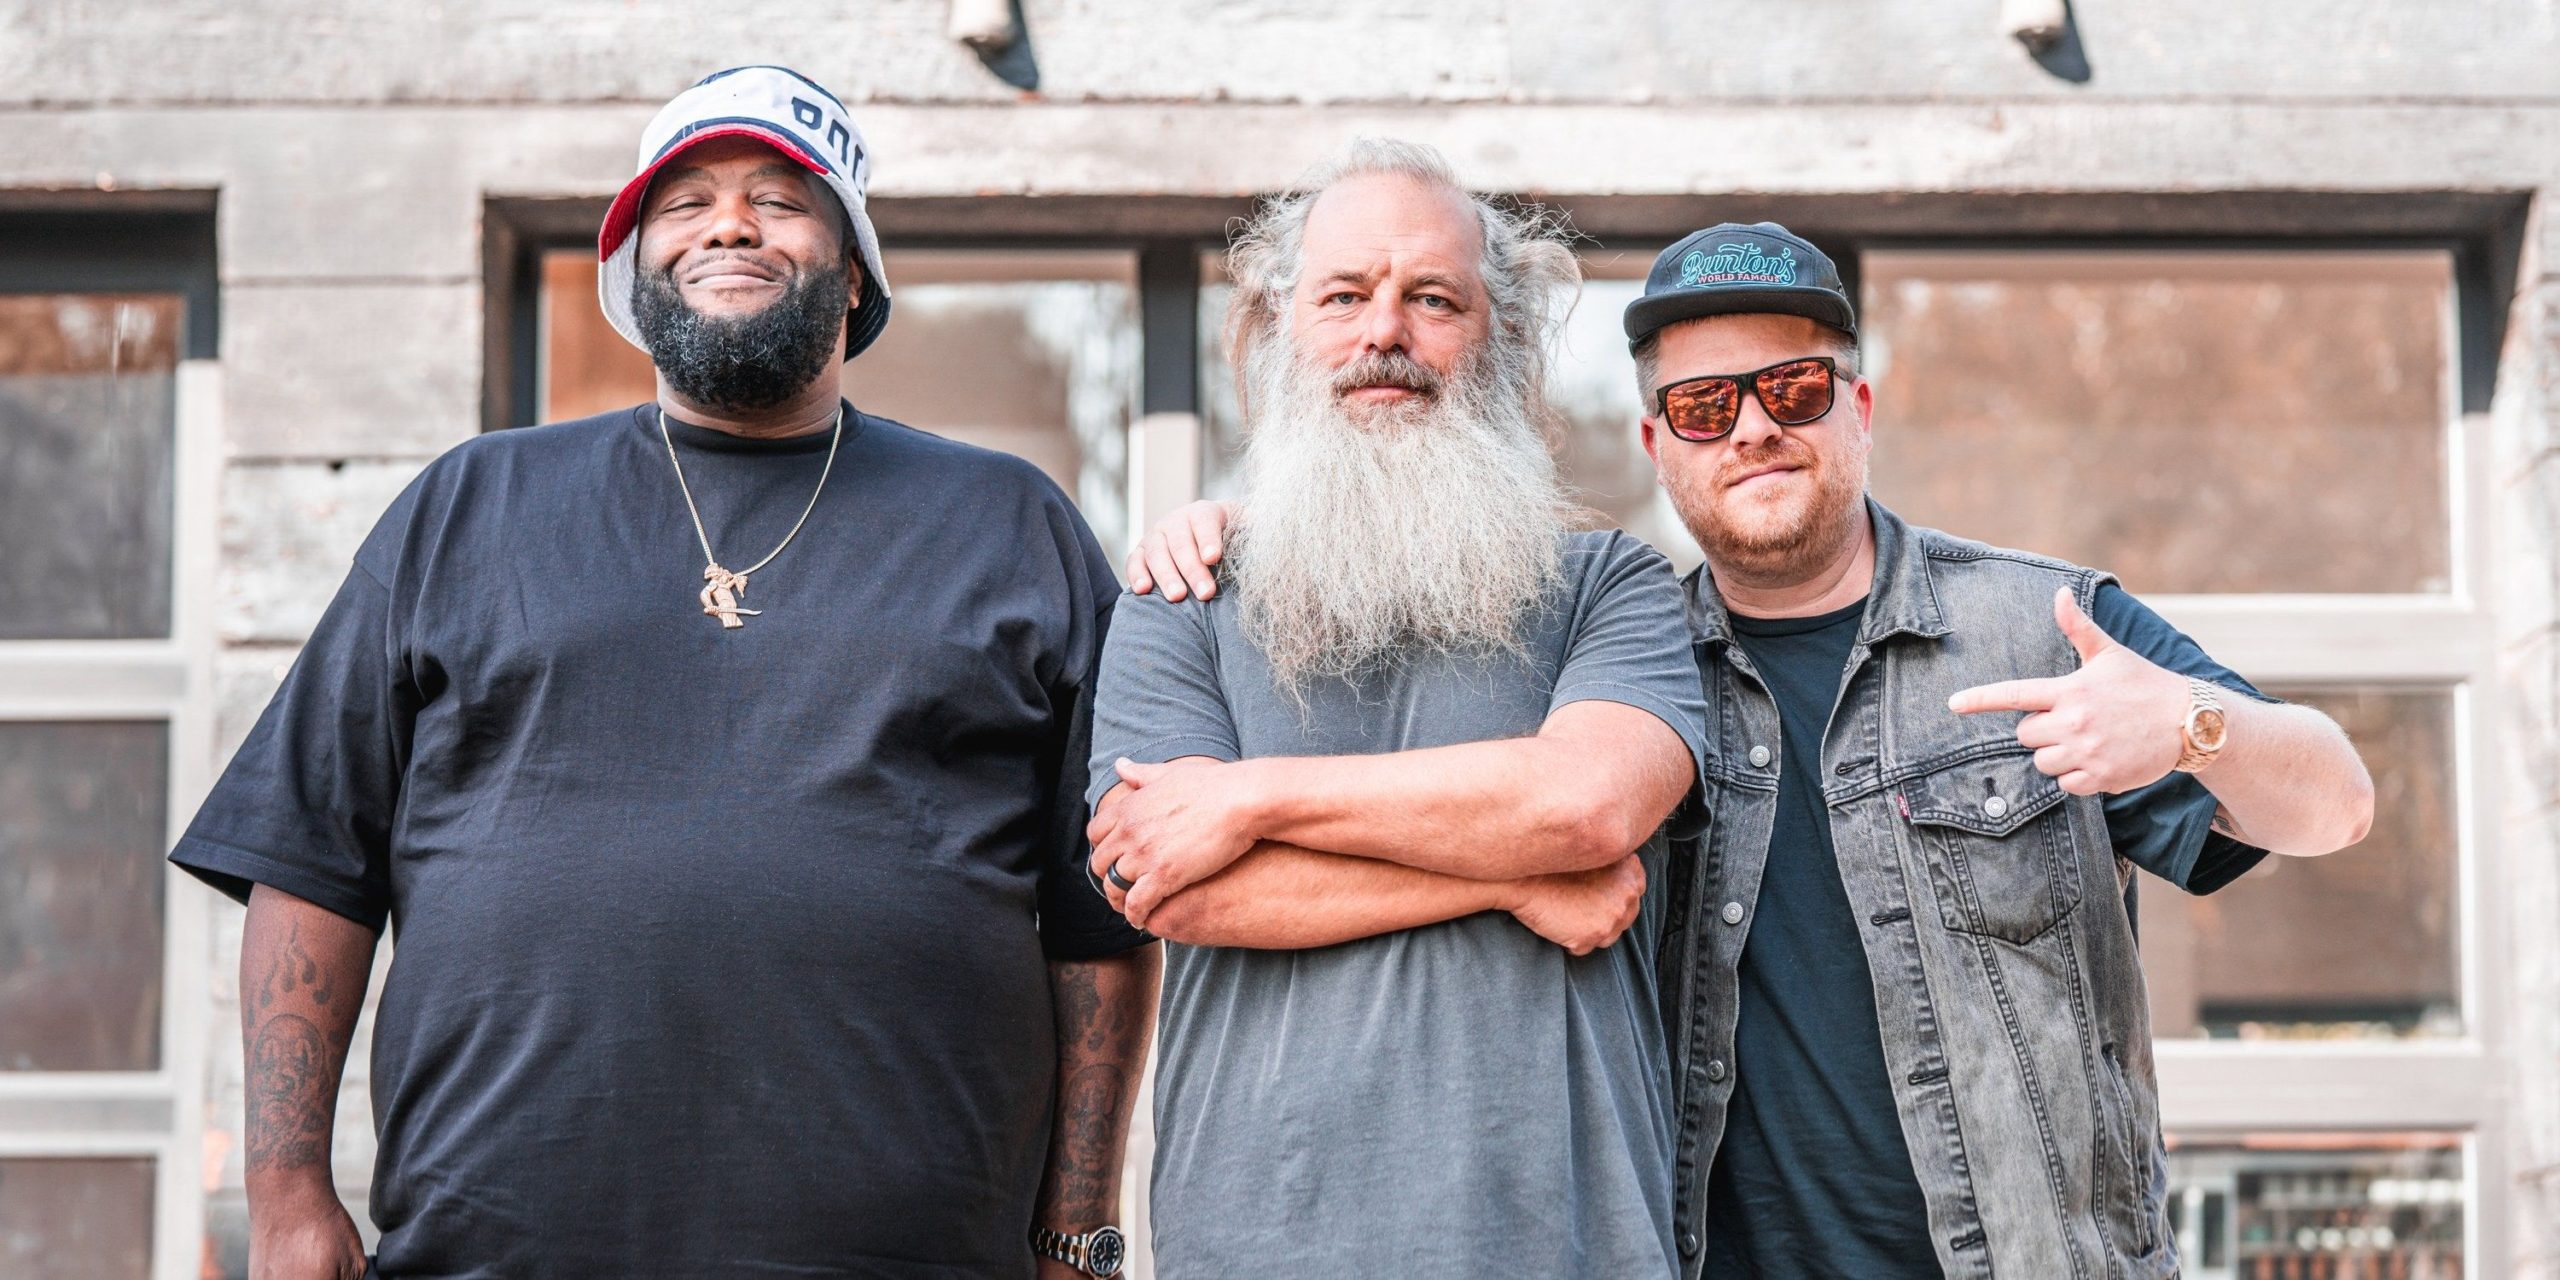 Run The Jewels Visits Rick Rubin’s ‘Broken Record’ Podcast To Talk About Keeping Their Mistakes On Wax